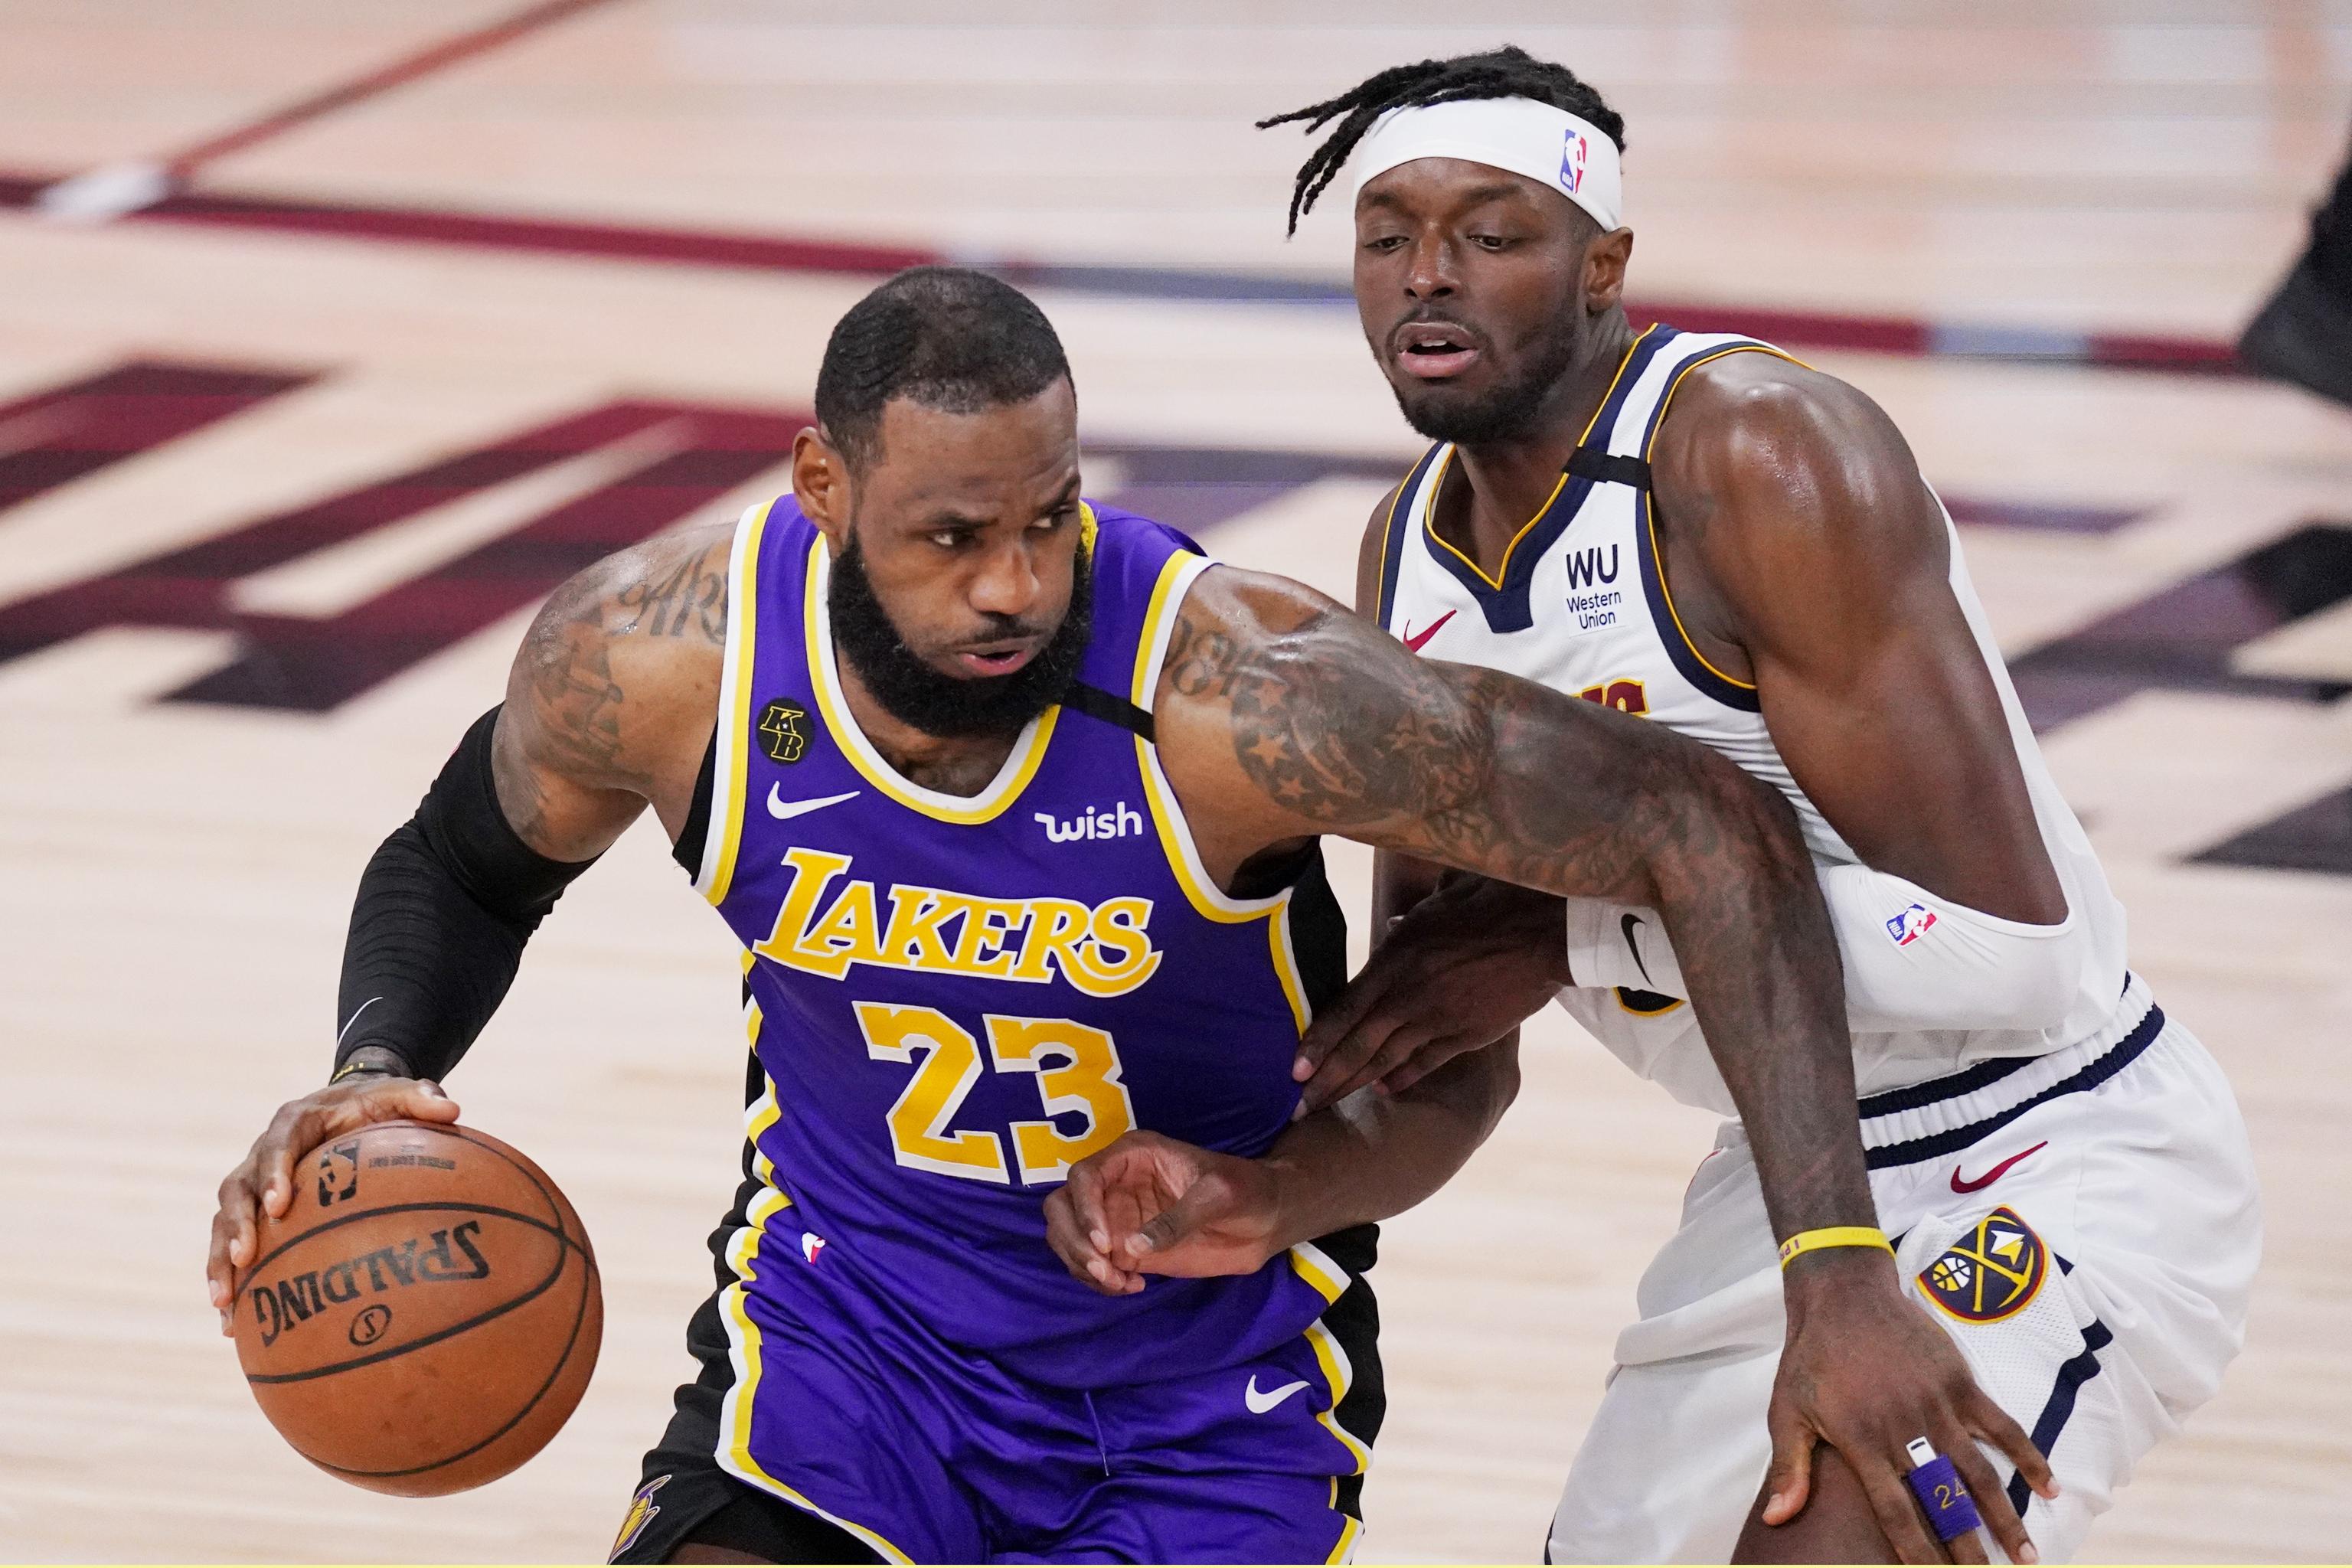 Nba Finals 2020 Heat Vs Lakers Game 1 Vegas Odds Prop Bets And Predictions Bleacher Report Latest News Videos And Highlights